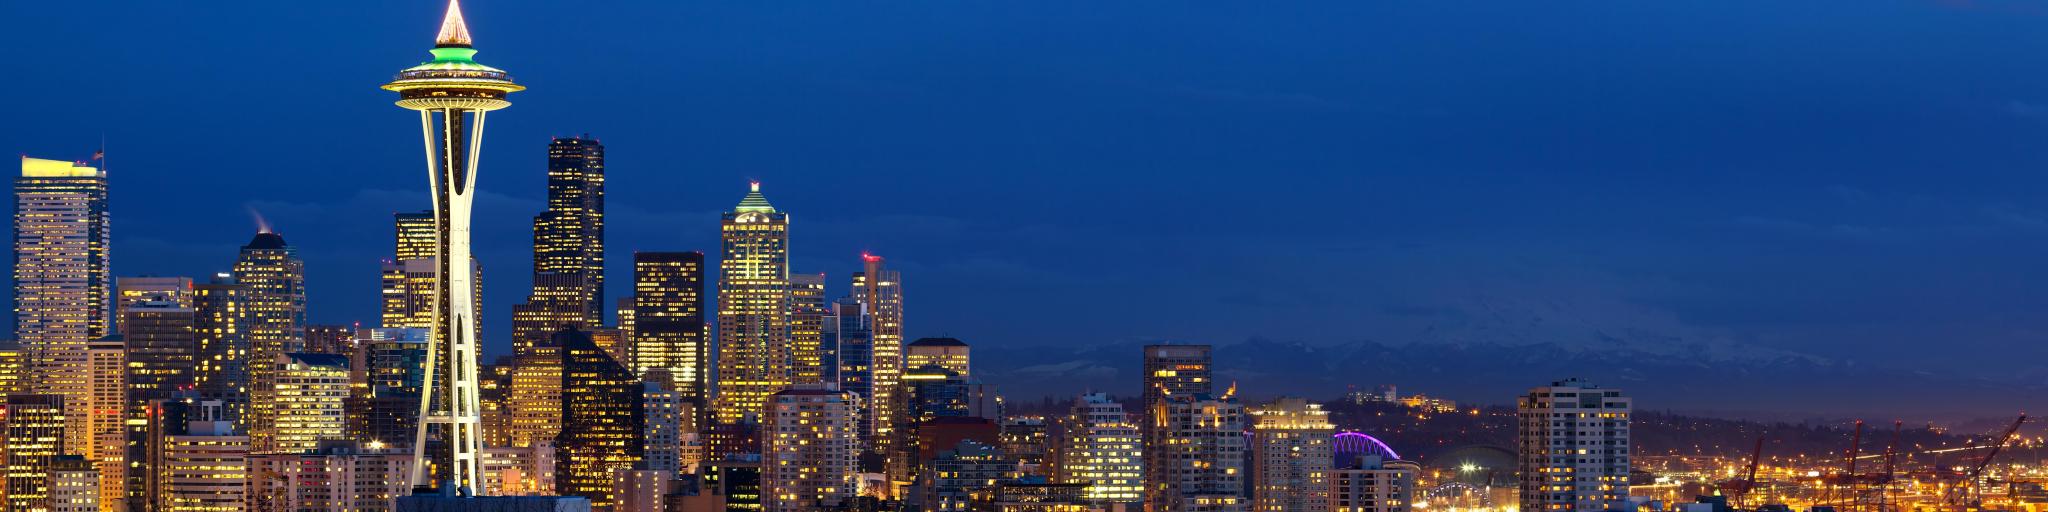 Panoramic view of Seattle at night with lights showing from high rise buildings 